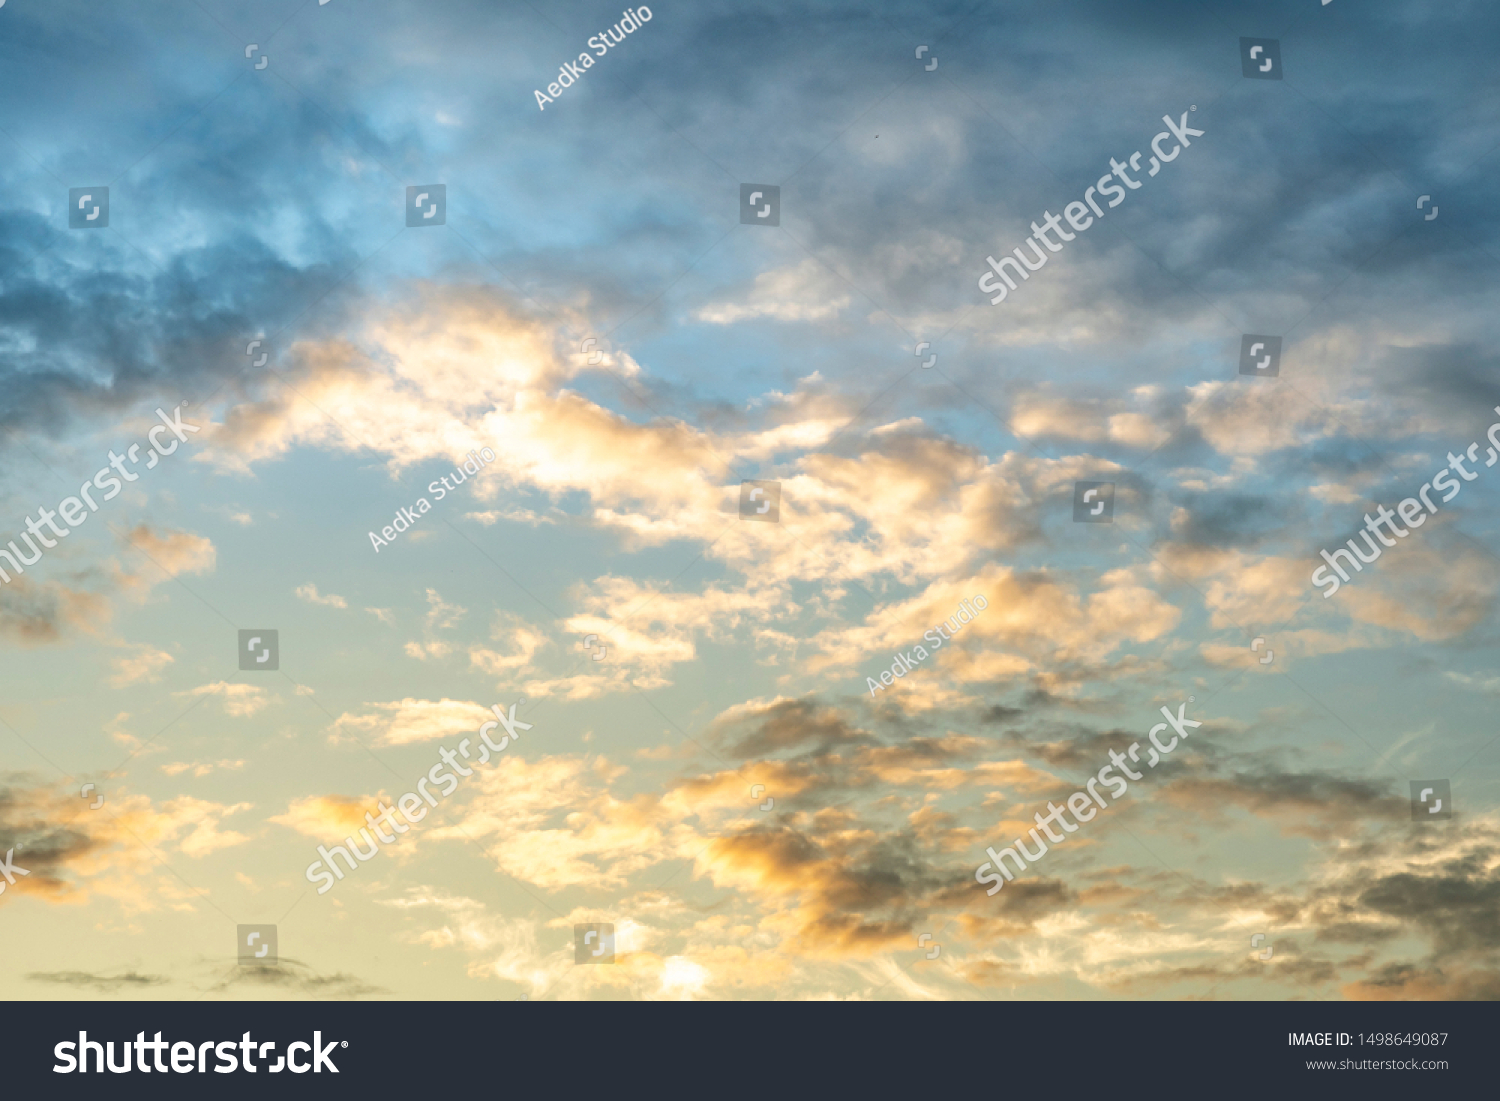 Colorful cloudy sky after rain, Beautiful evening skyscape. Sun's rays shine through hole in black clouds after rain. Sky, Golden sky. Natural background. Inspirational concept. #1498649087